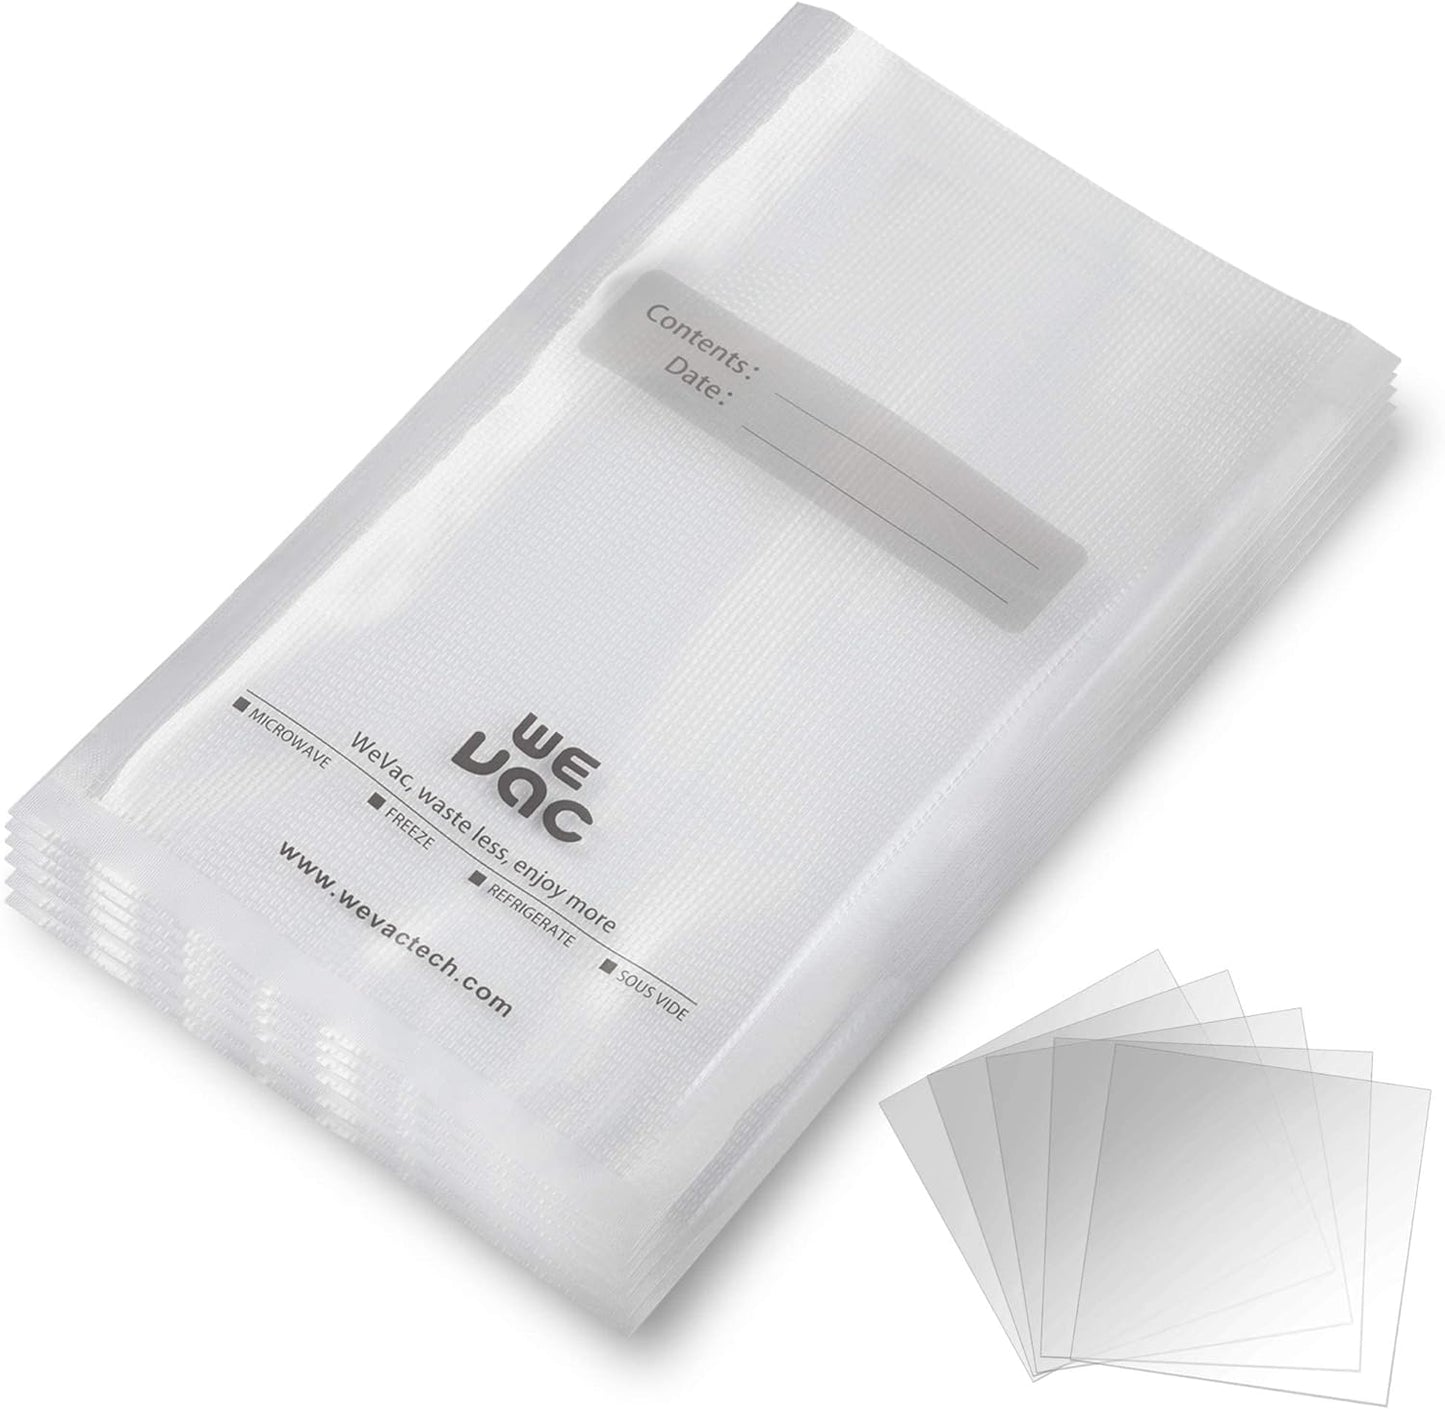 Vacuum Sealer Bags 11 x 16 Inch for Food Saver Qty 100